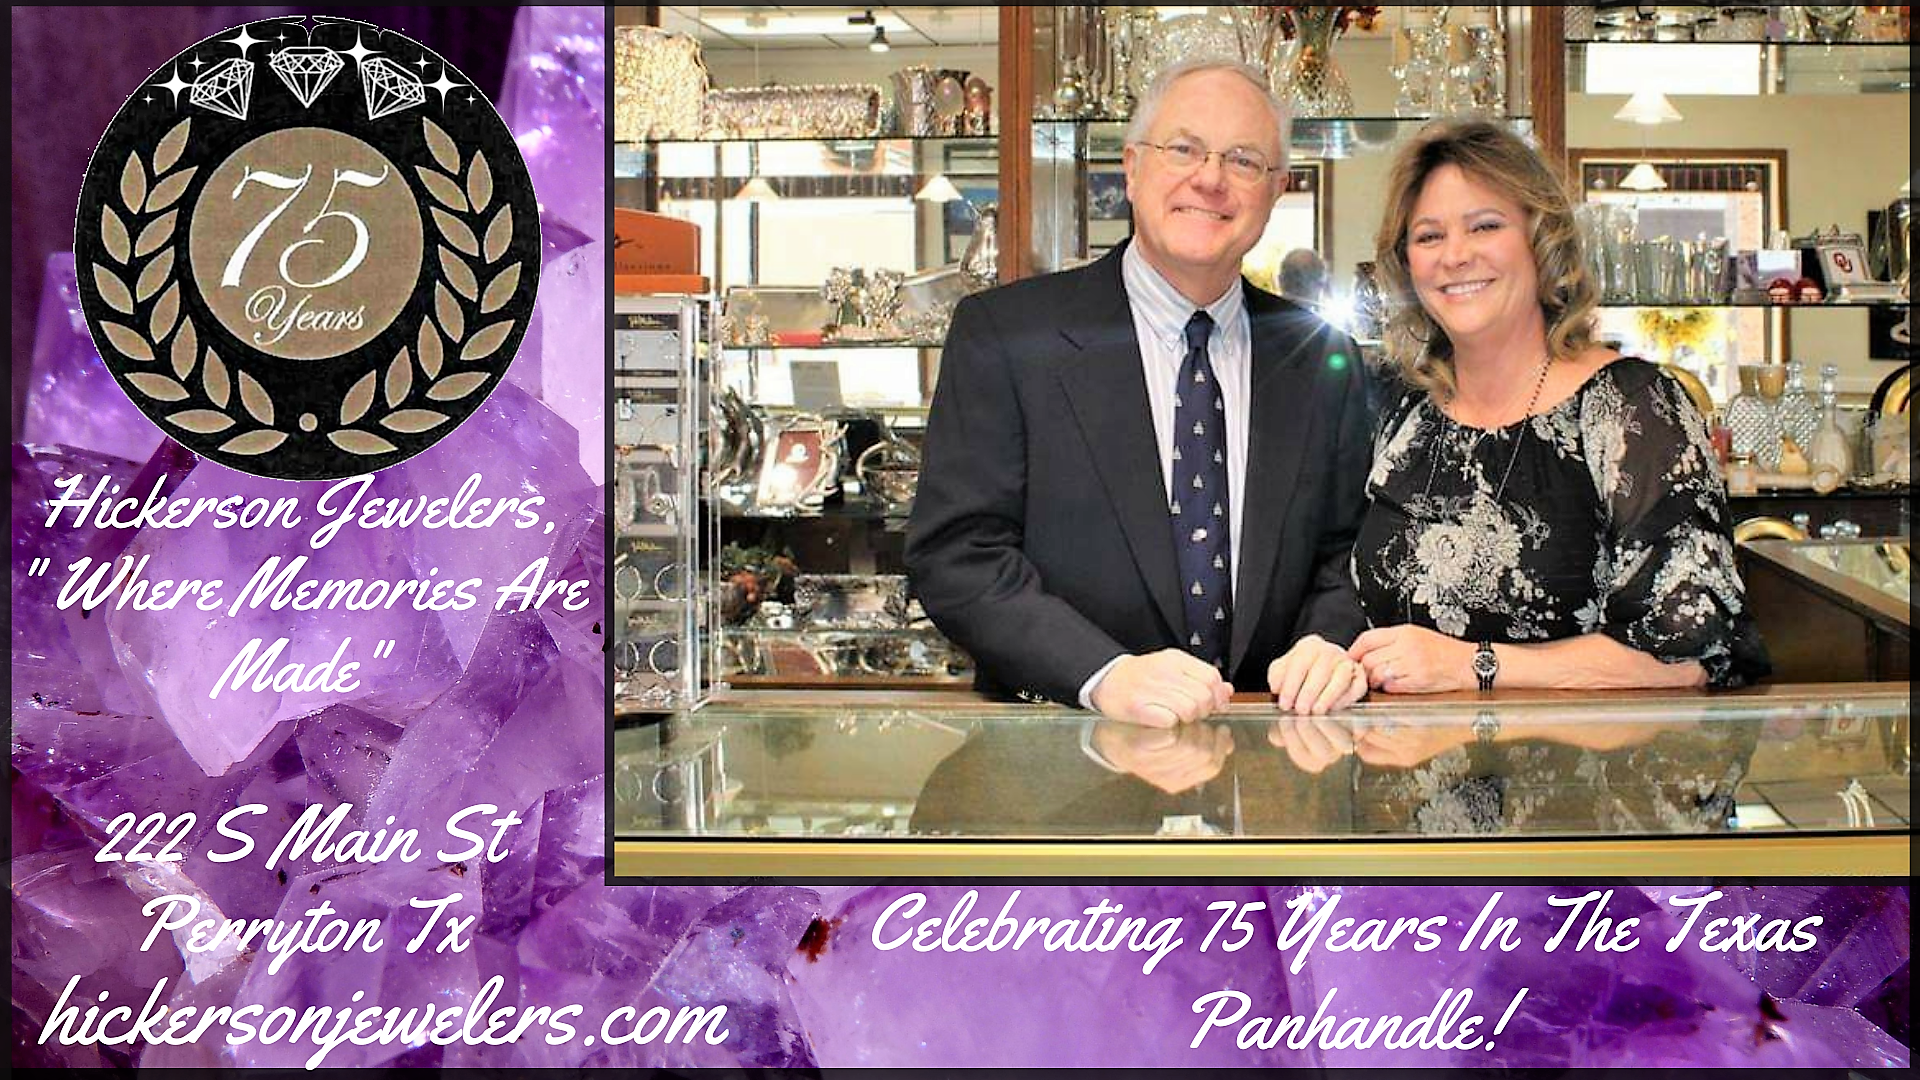 Hickerson Jewelers 222 S Main St, Perryton Texas 79070